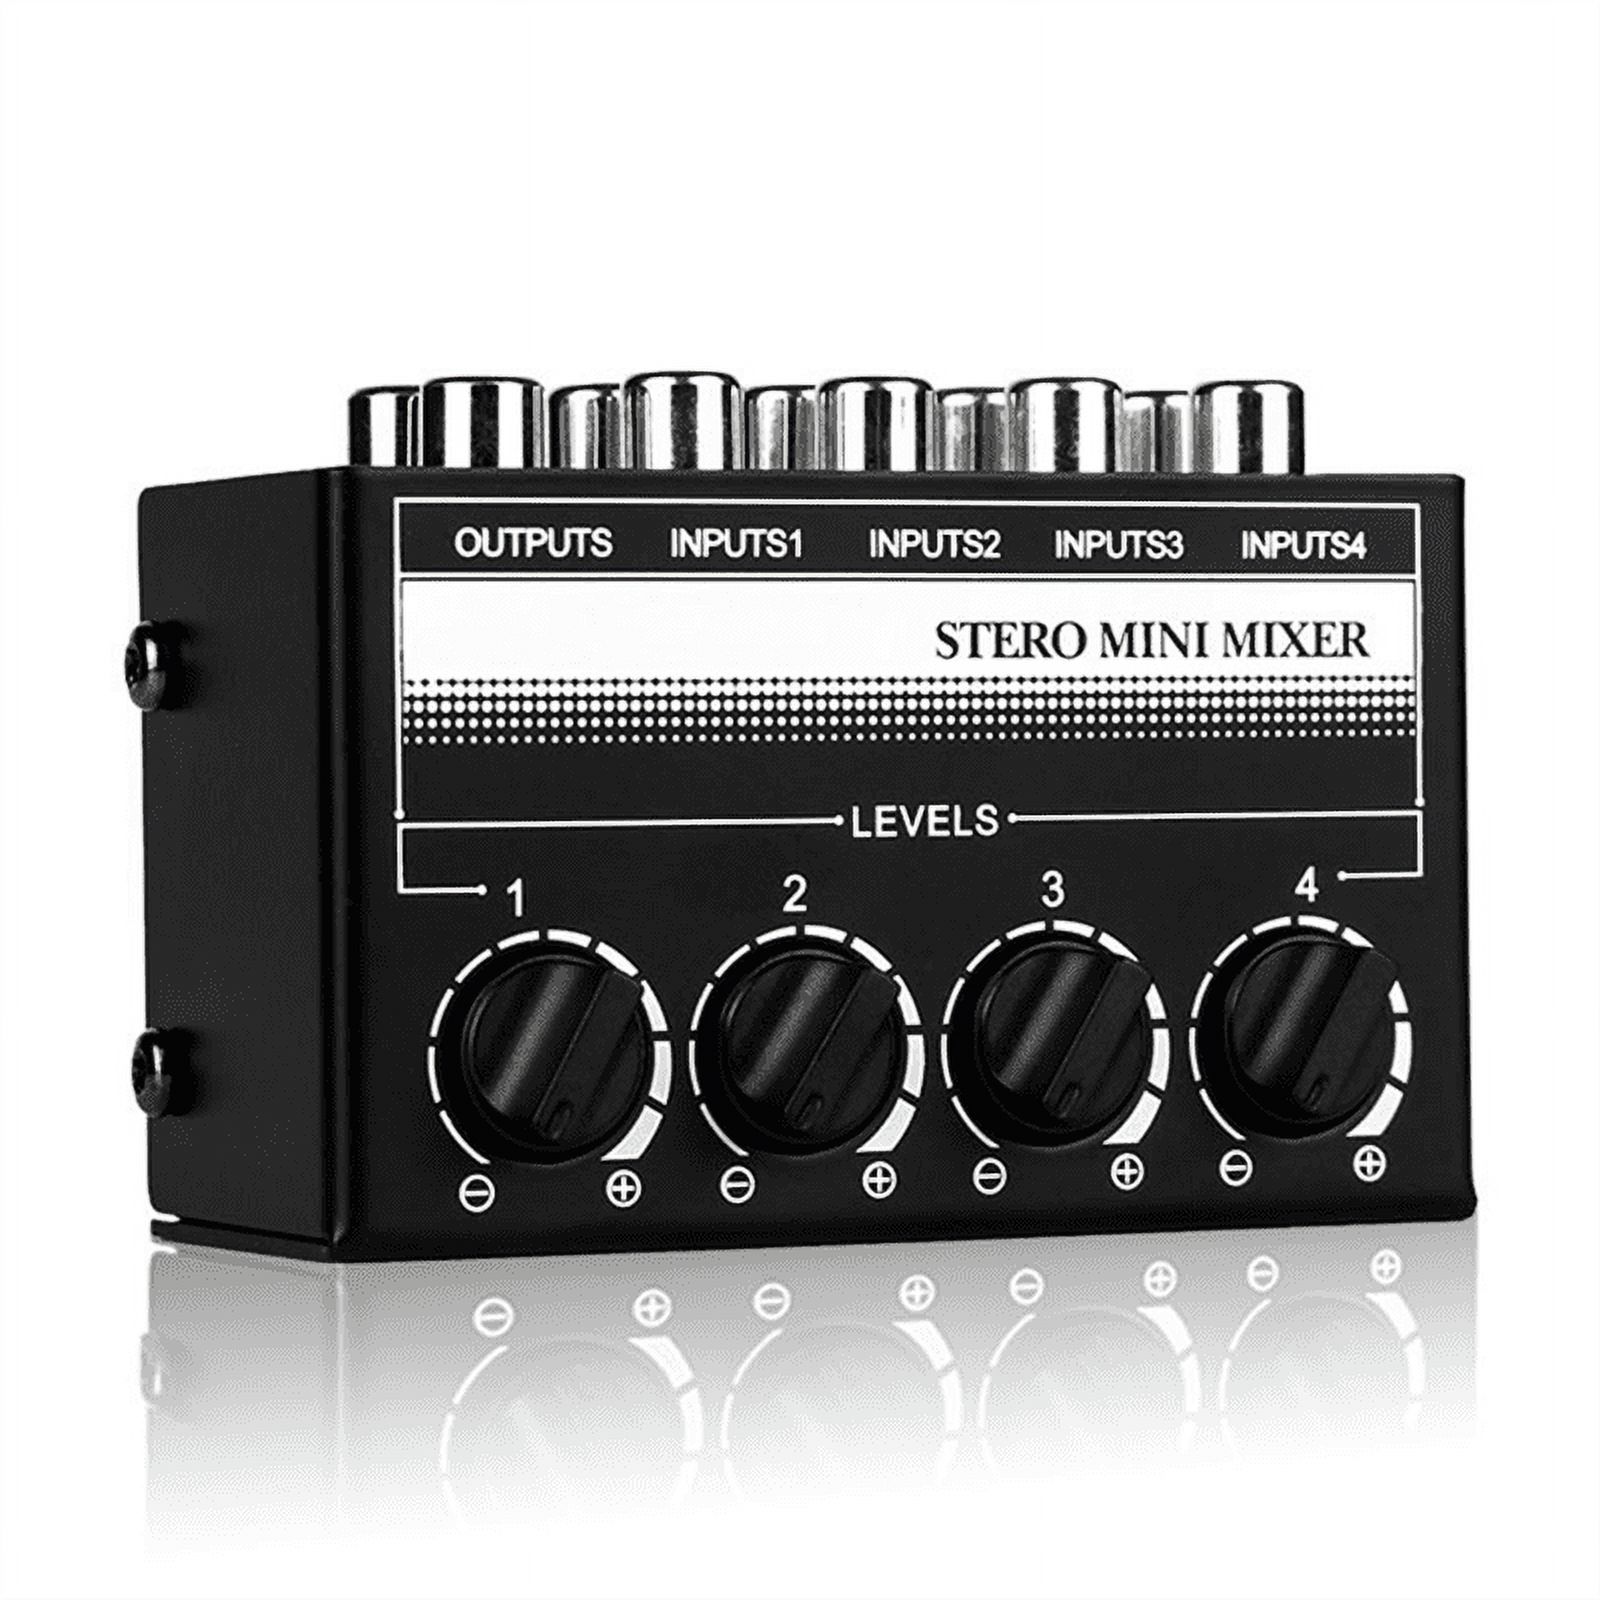 Audio Mixer Mini Stereo 4-Channel Passive Mixer Microphone Multi-Channel 1 in 4 Out Stereo Splitter for Studio - image 2 of 10